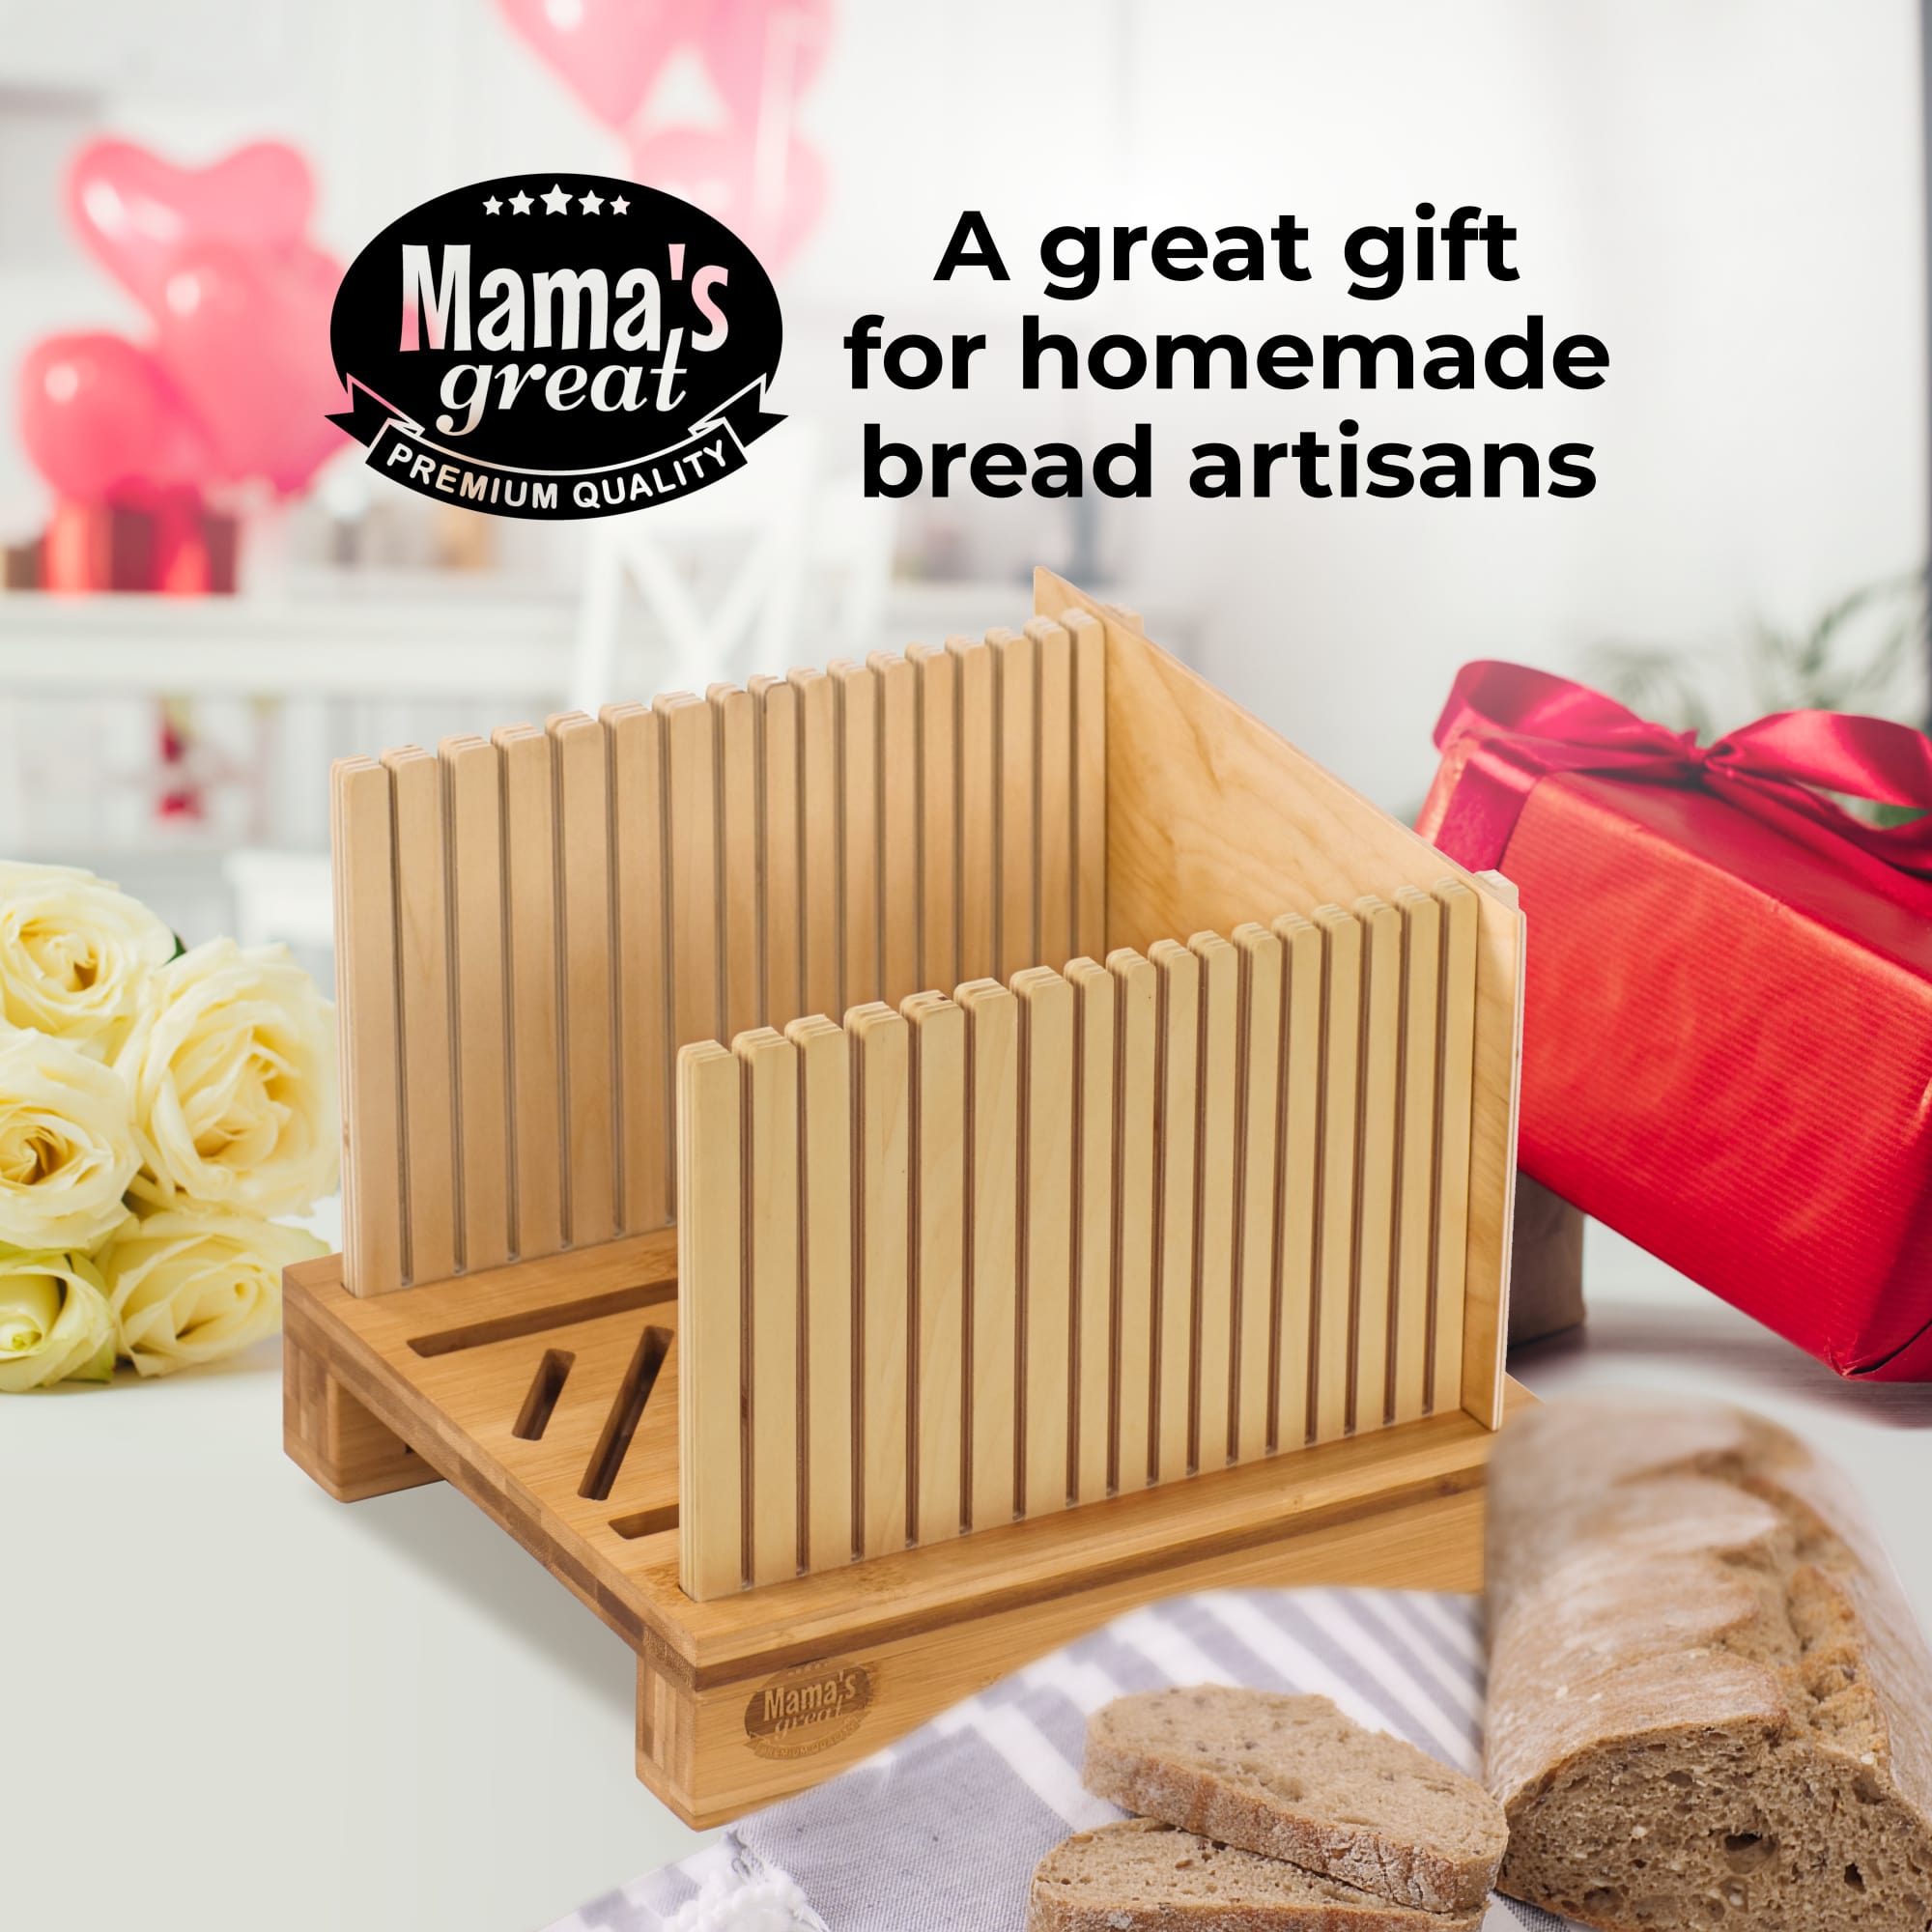 https://www.mamasgreat.com/wp-content/uploads/2021/07/Bread-Slicer-is-a-great-gift-for-homemade-bread-artisans-min.jpg